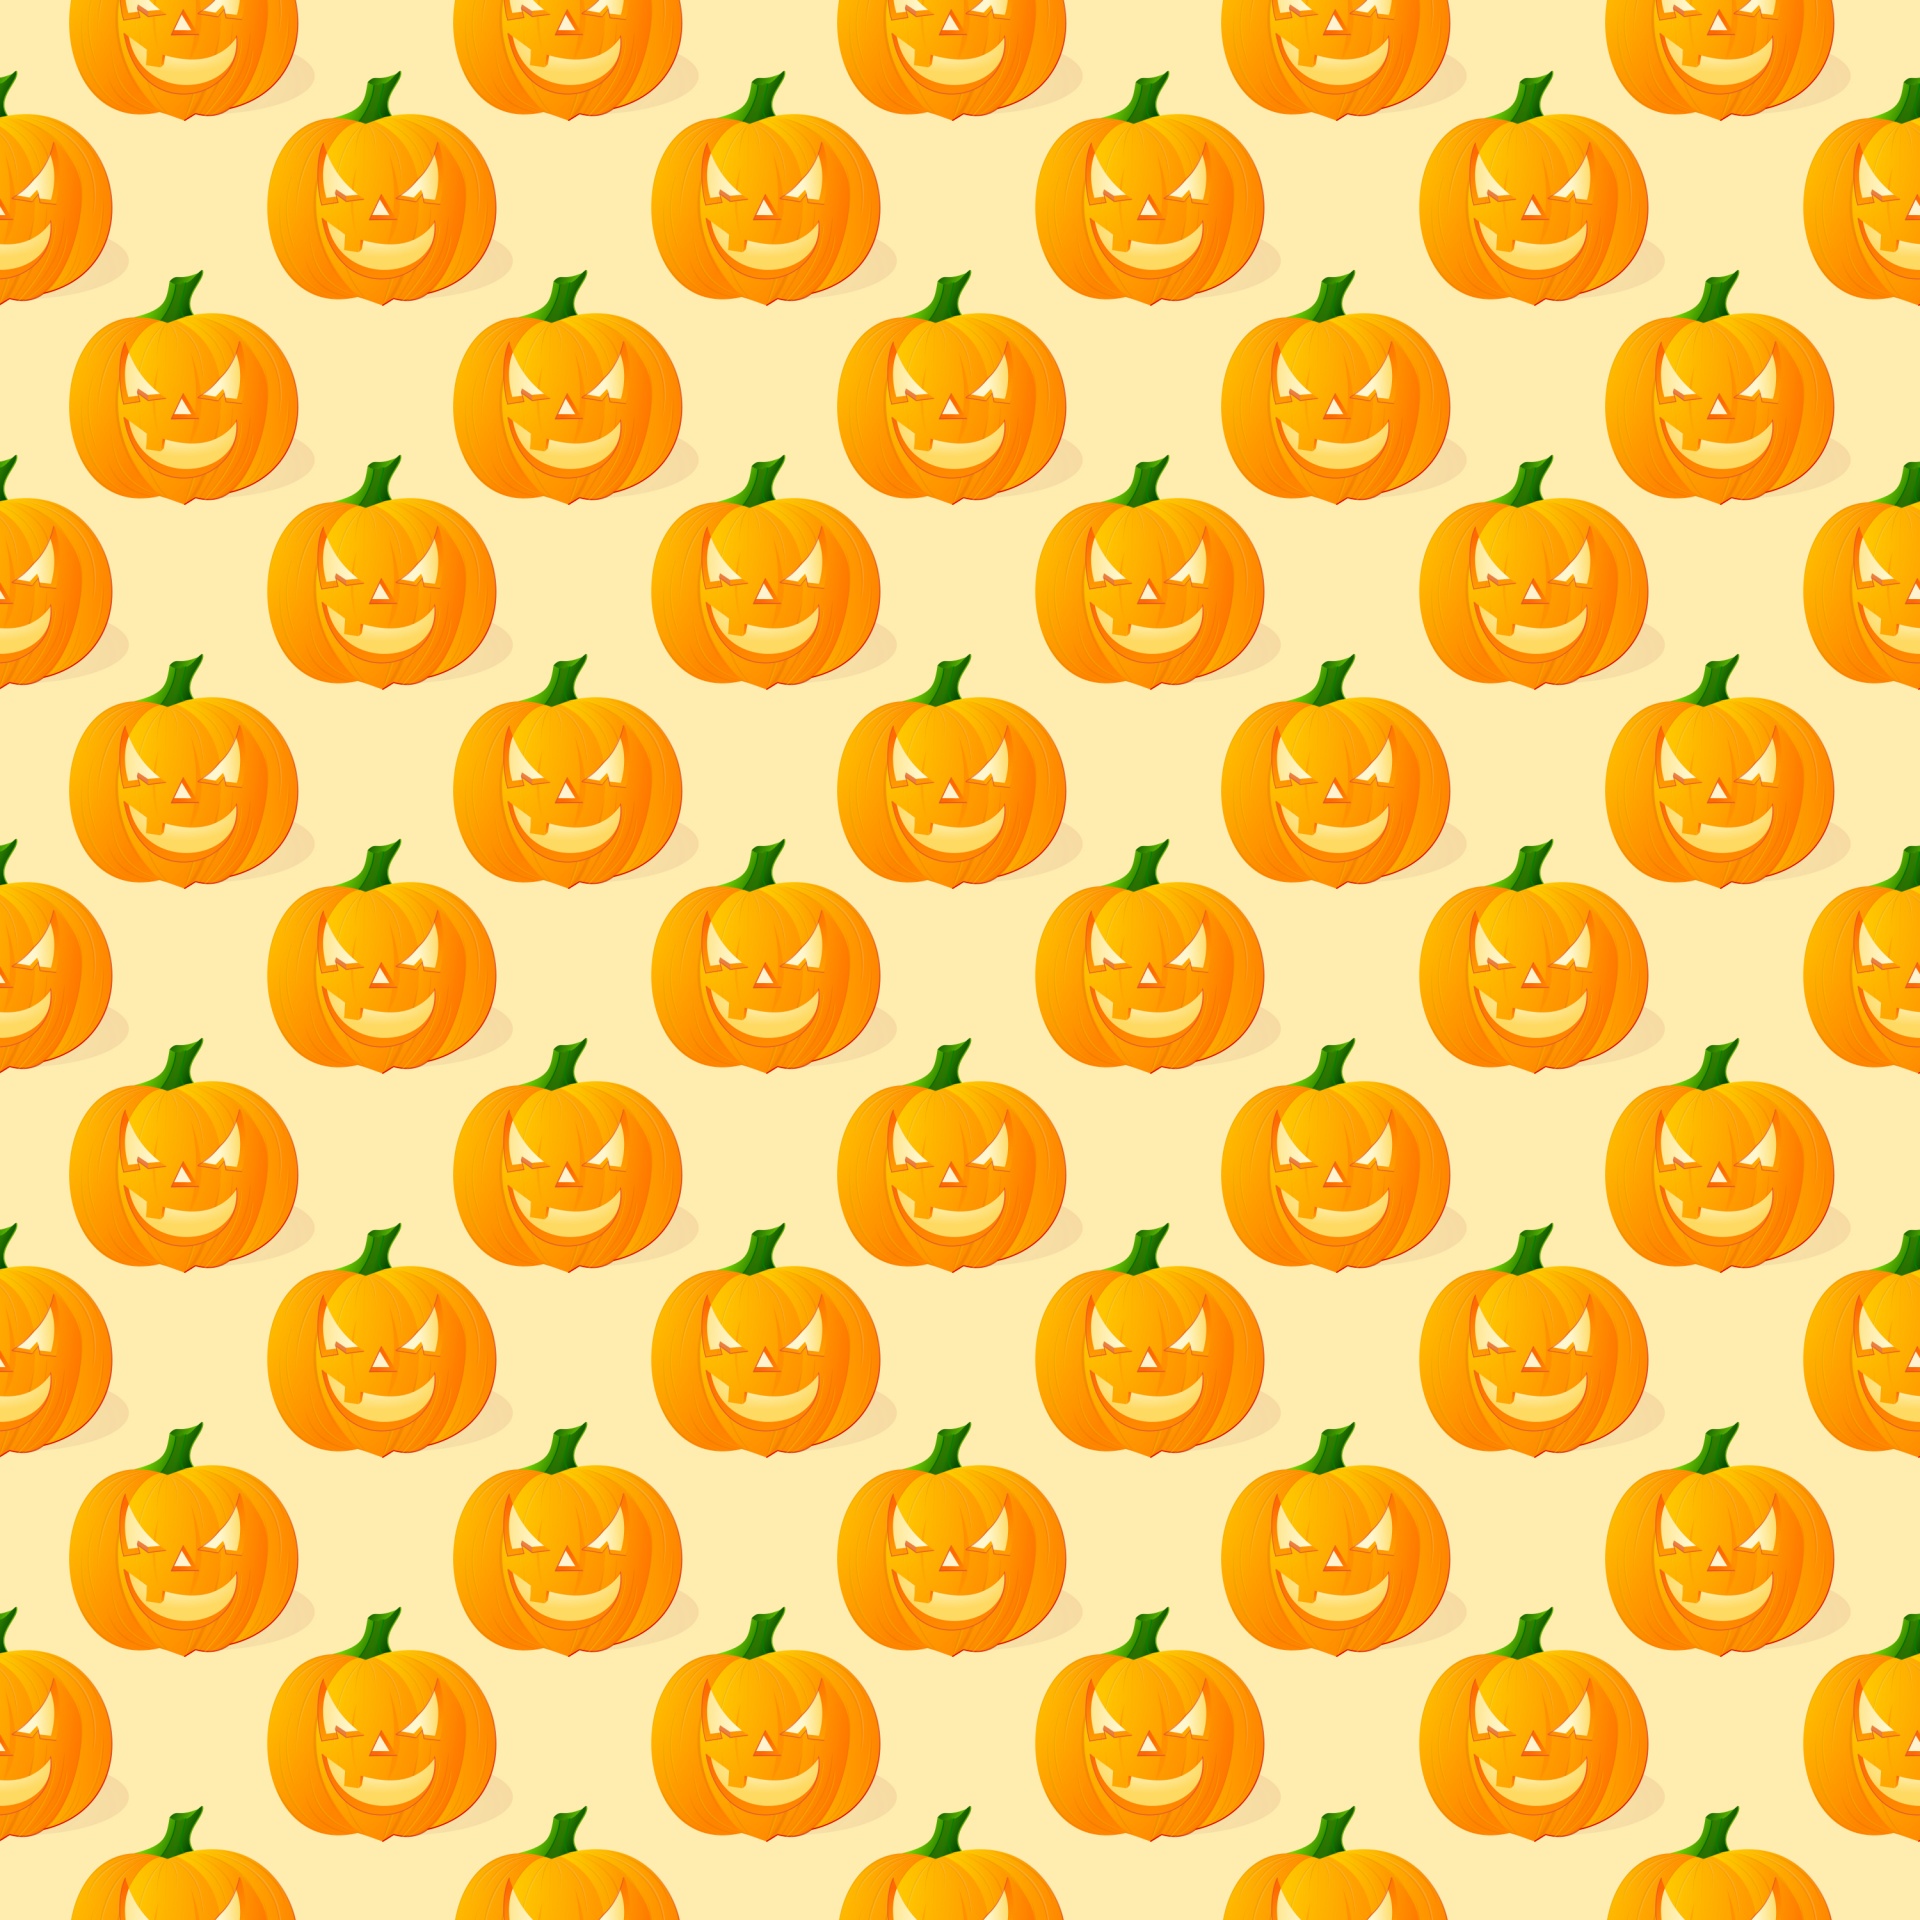 Repeated pattern of pumpkins